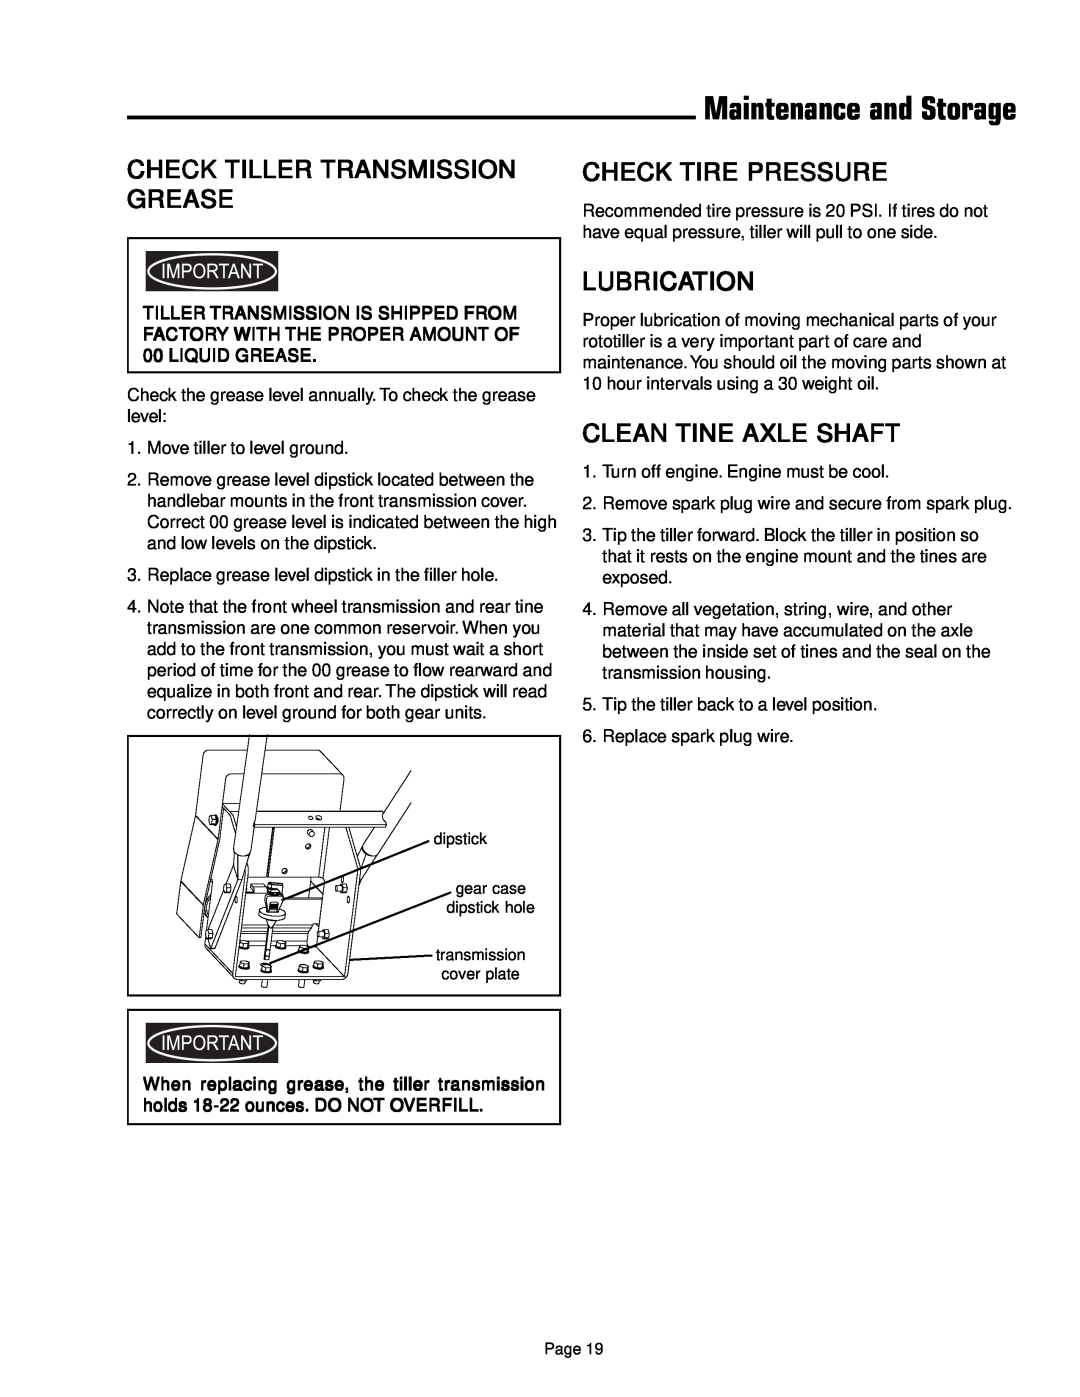 Simplicity 1693847 manual Check Tiller Transmission Grease, Check Tire Pressure, Lubrication, Clean Tine Axle Shaft 